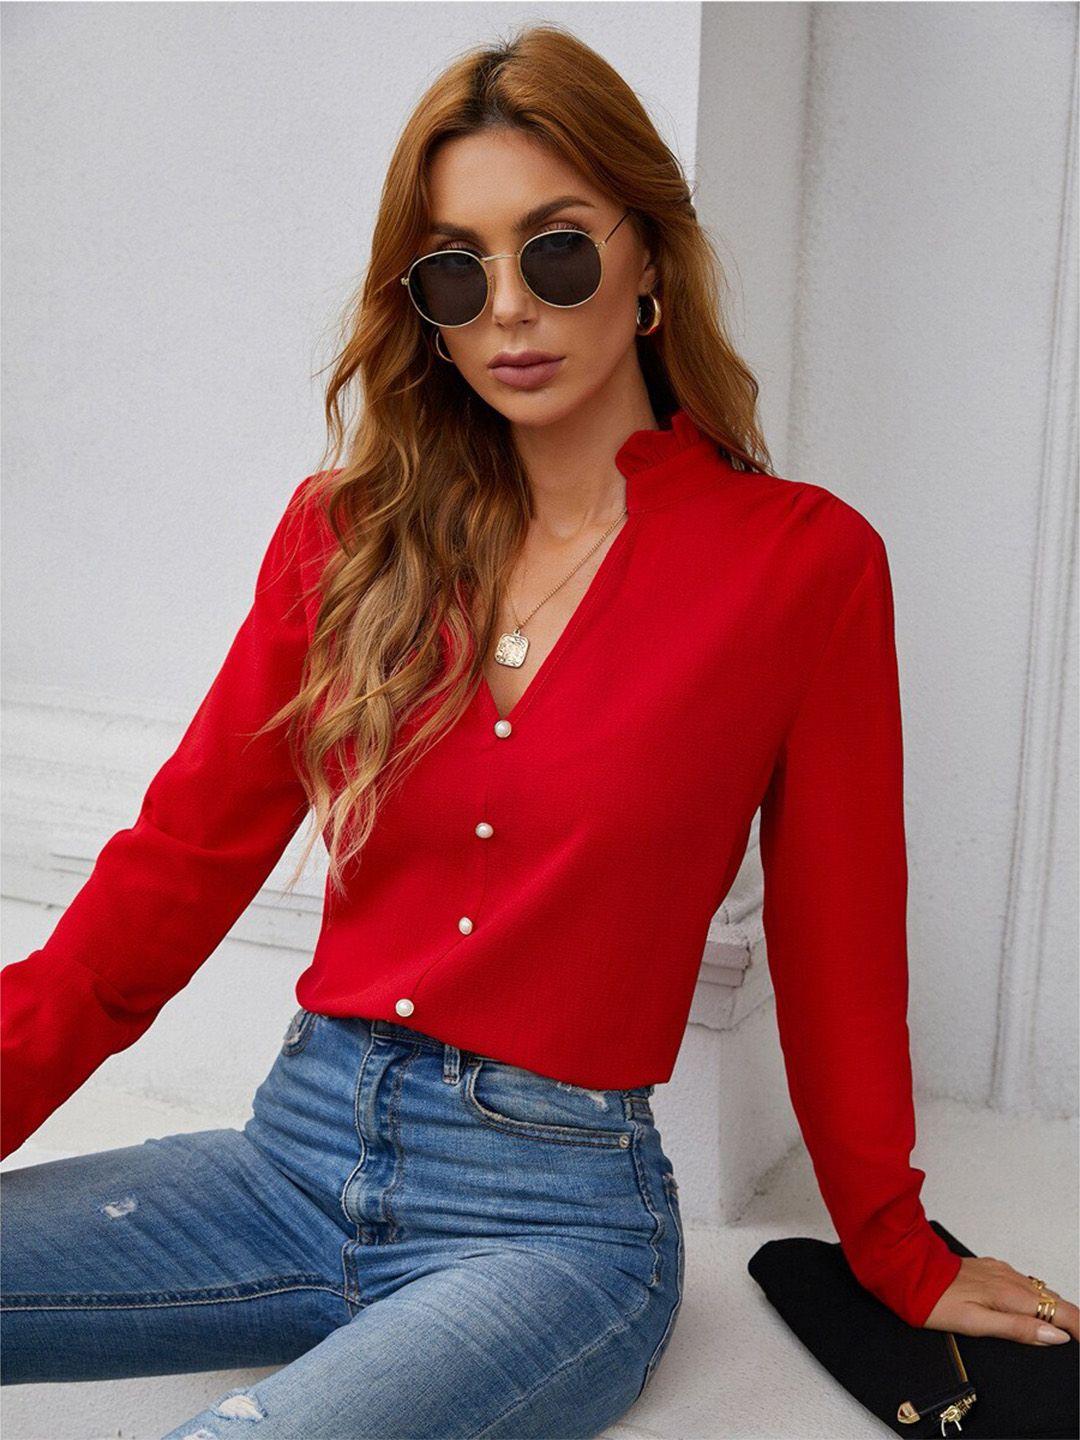 bostreet red shirt style top